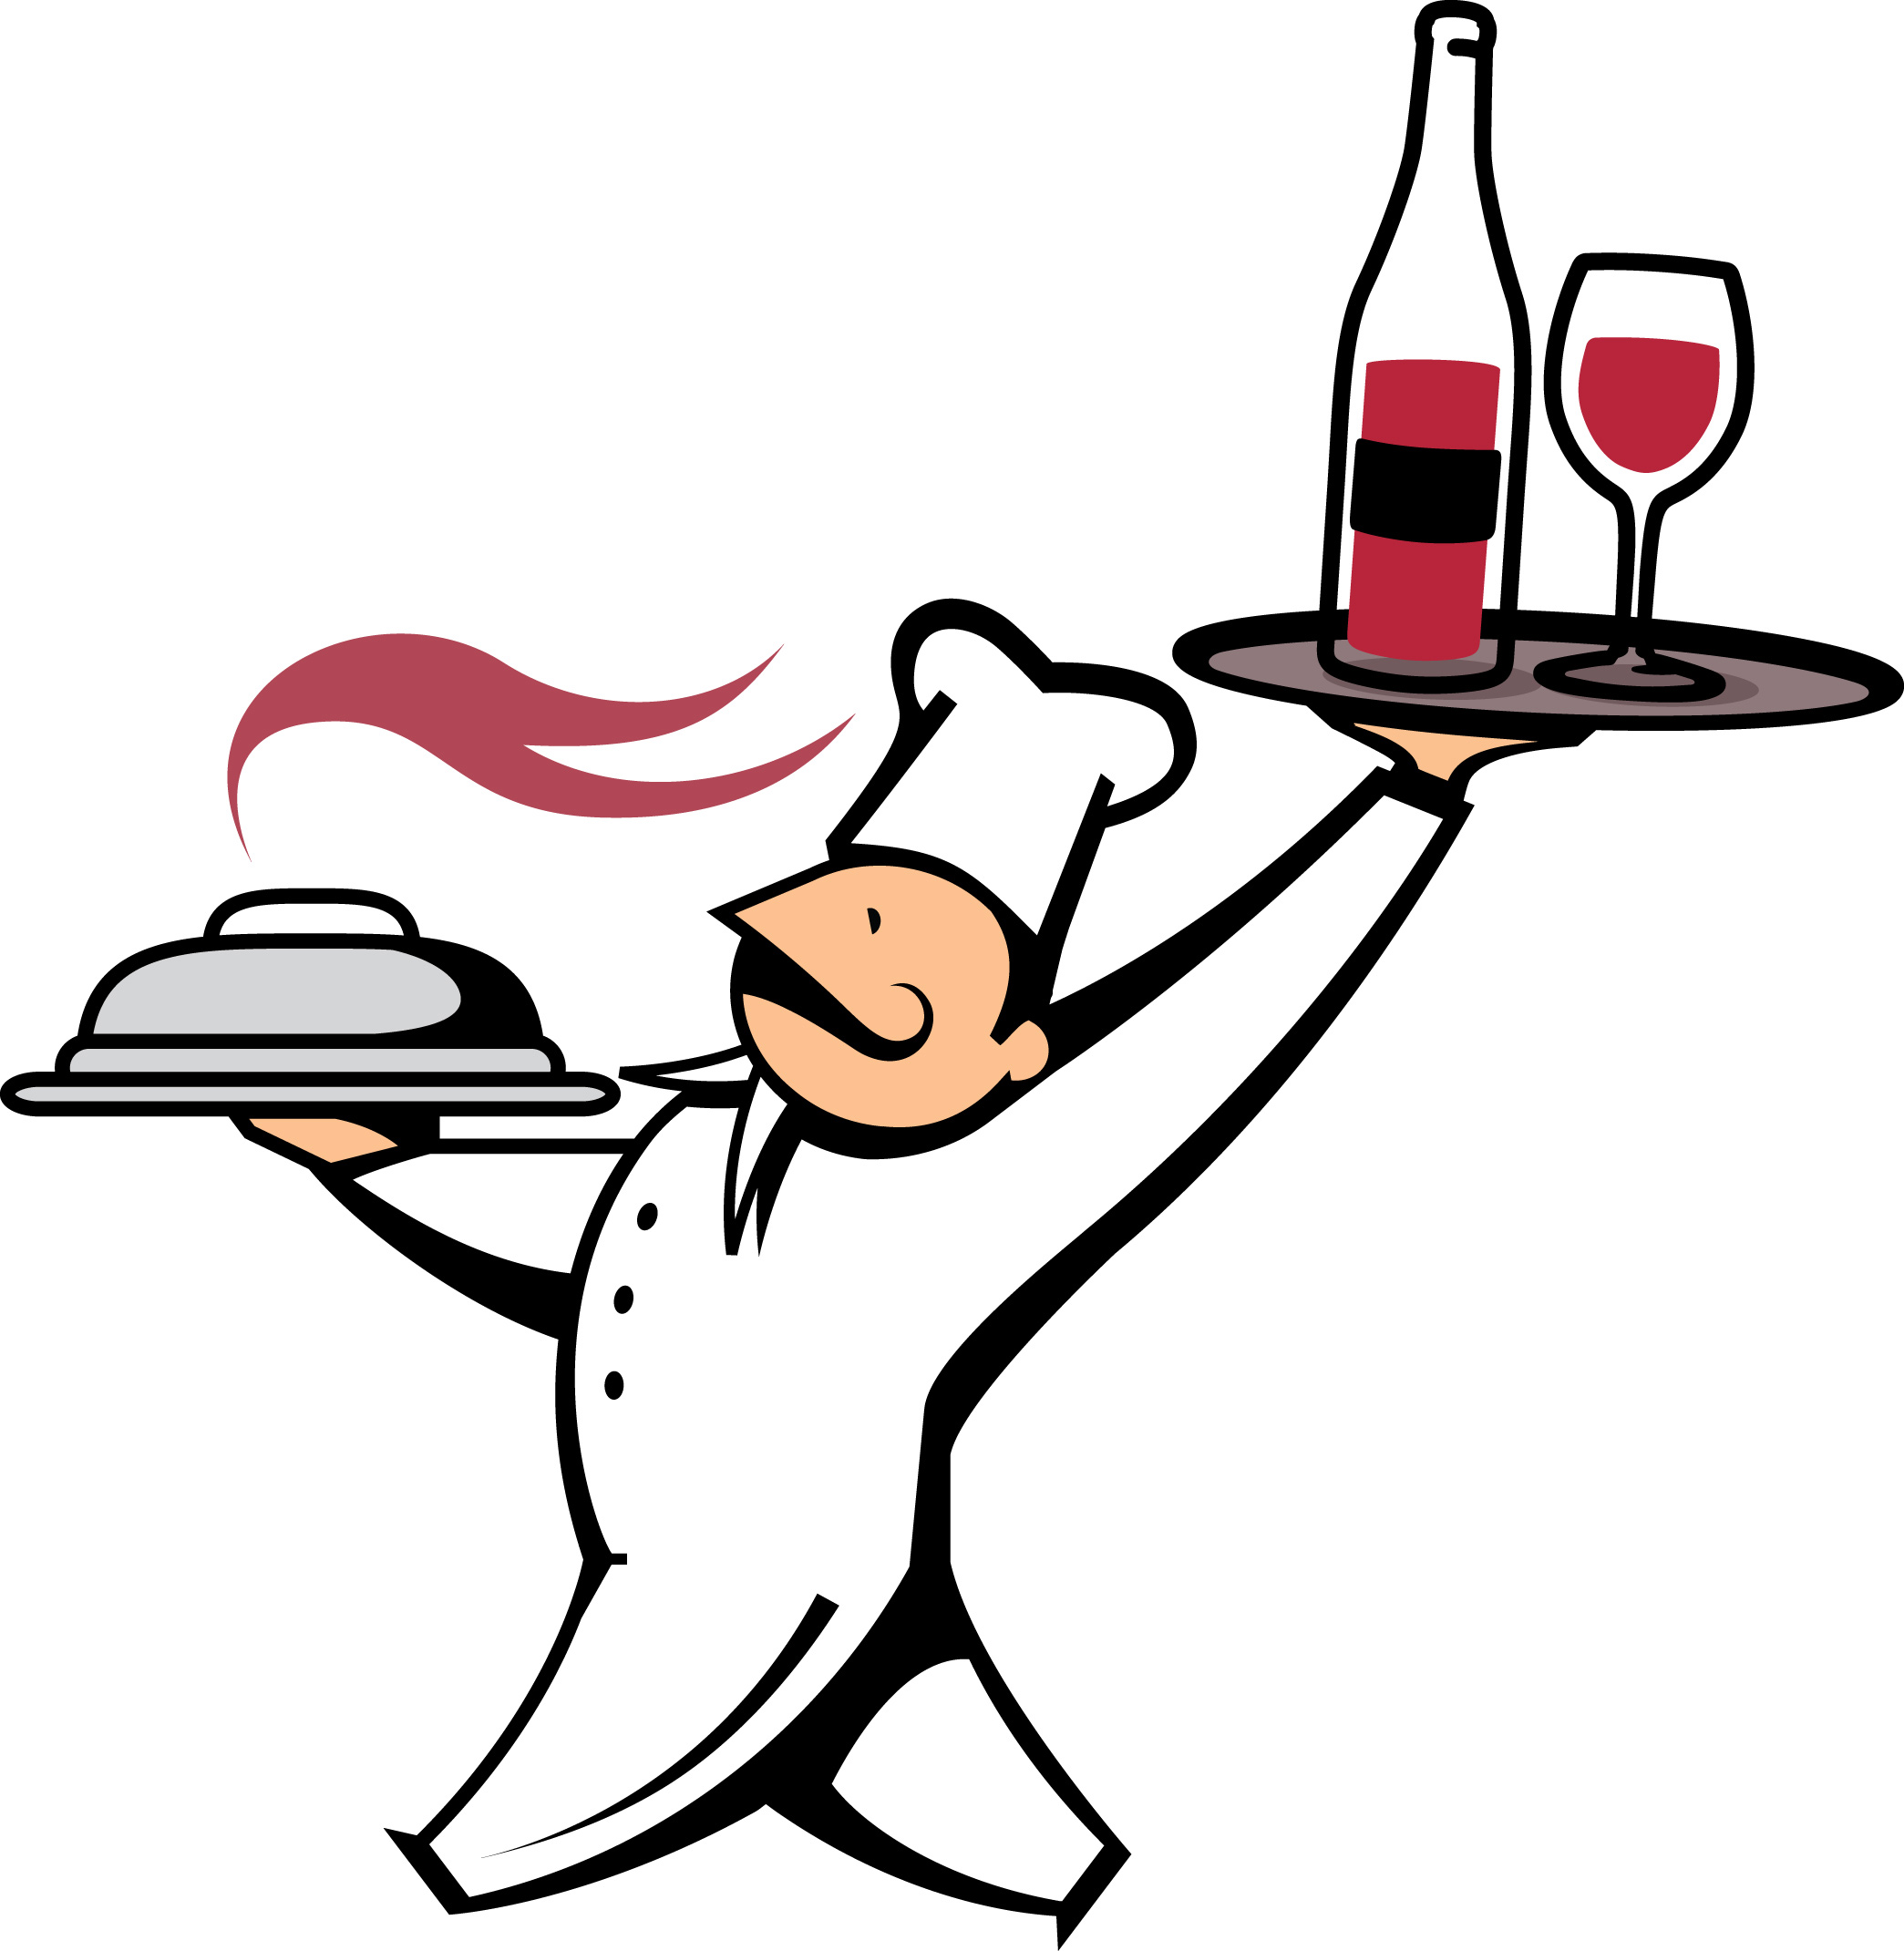 clipart chef images - photo #44